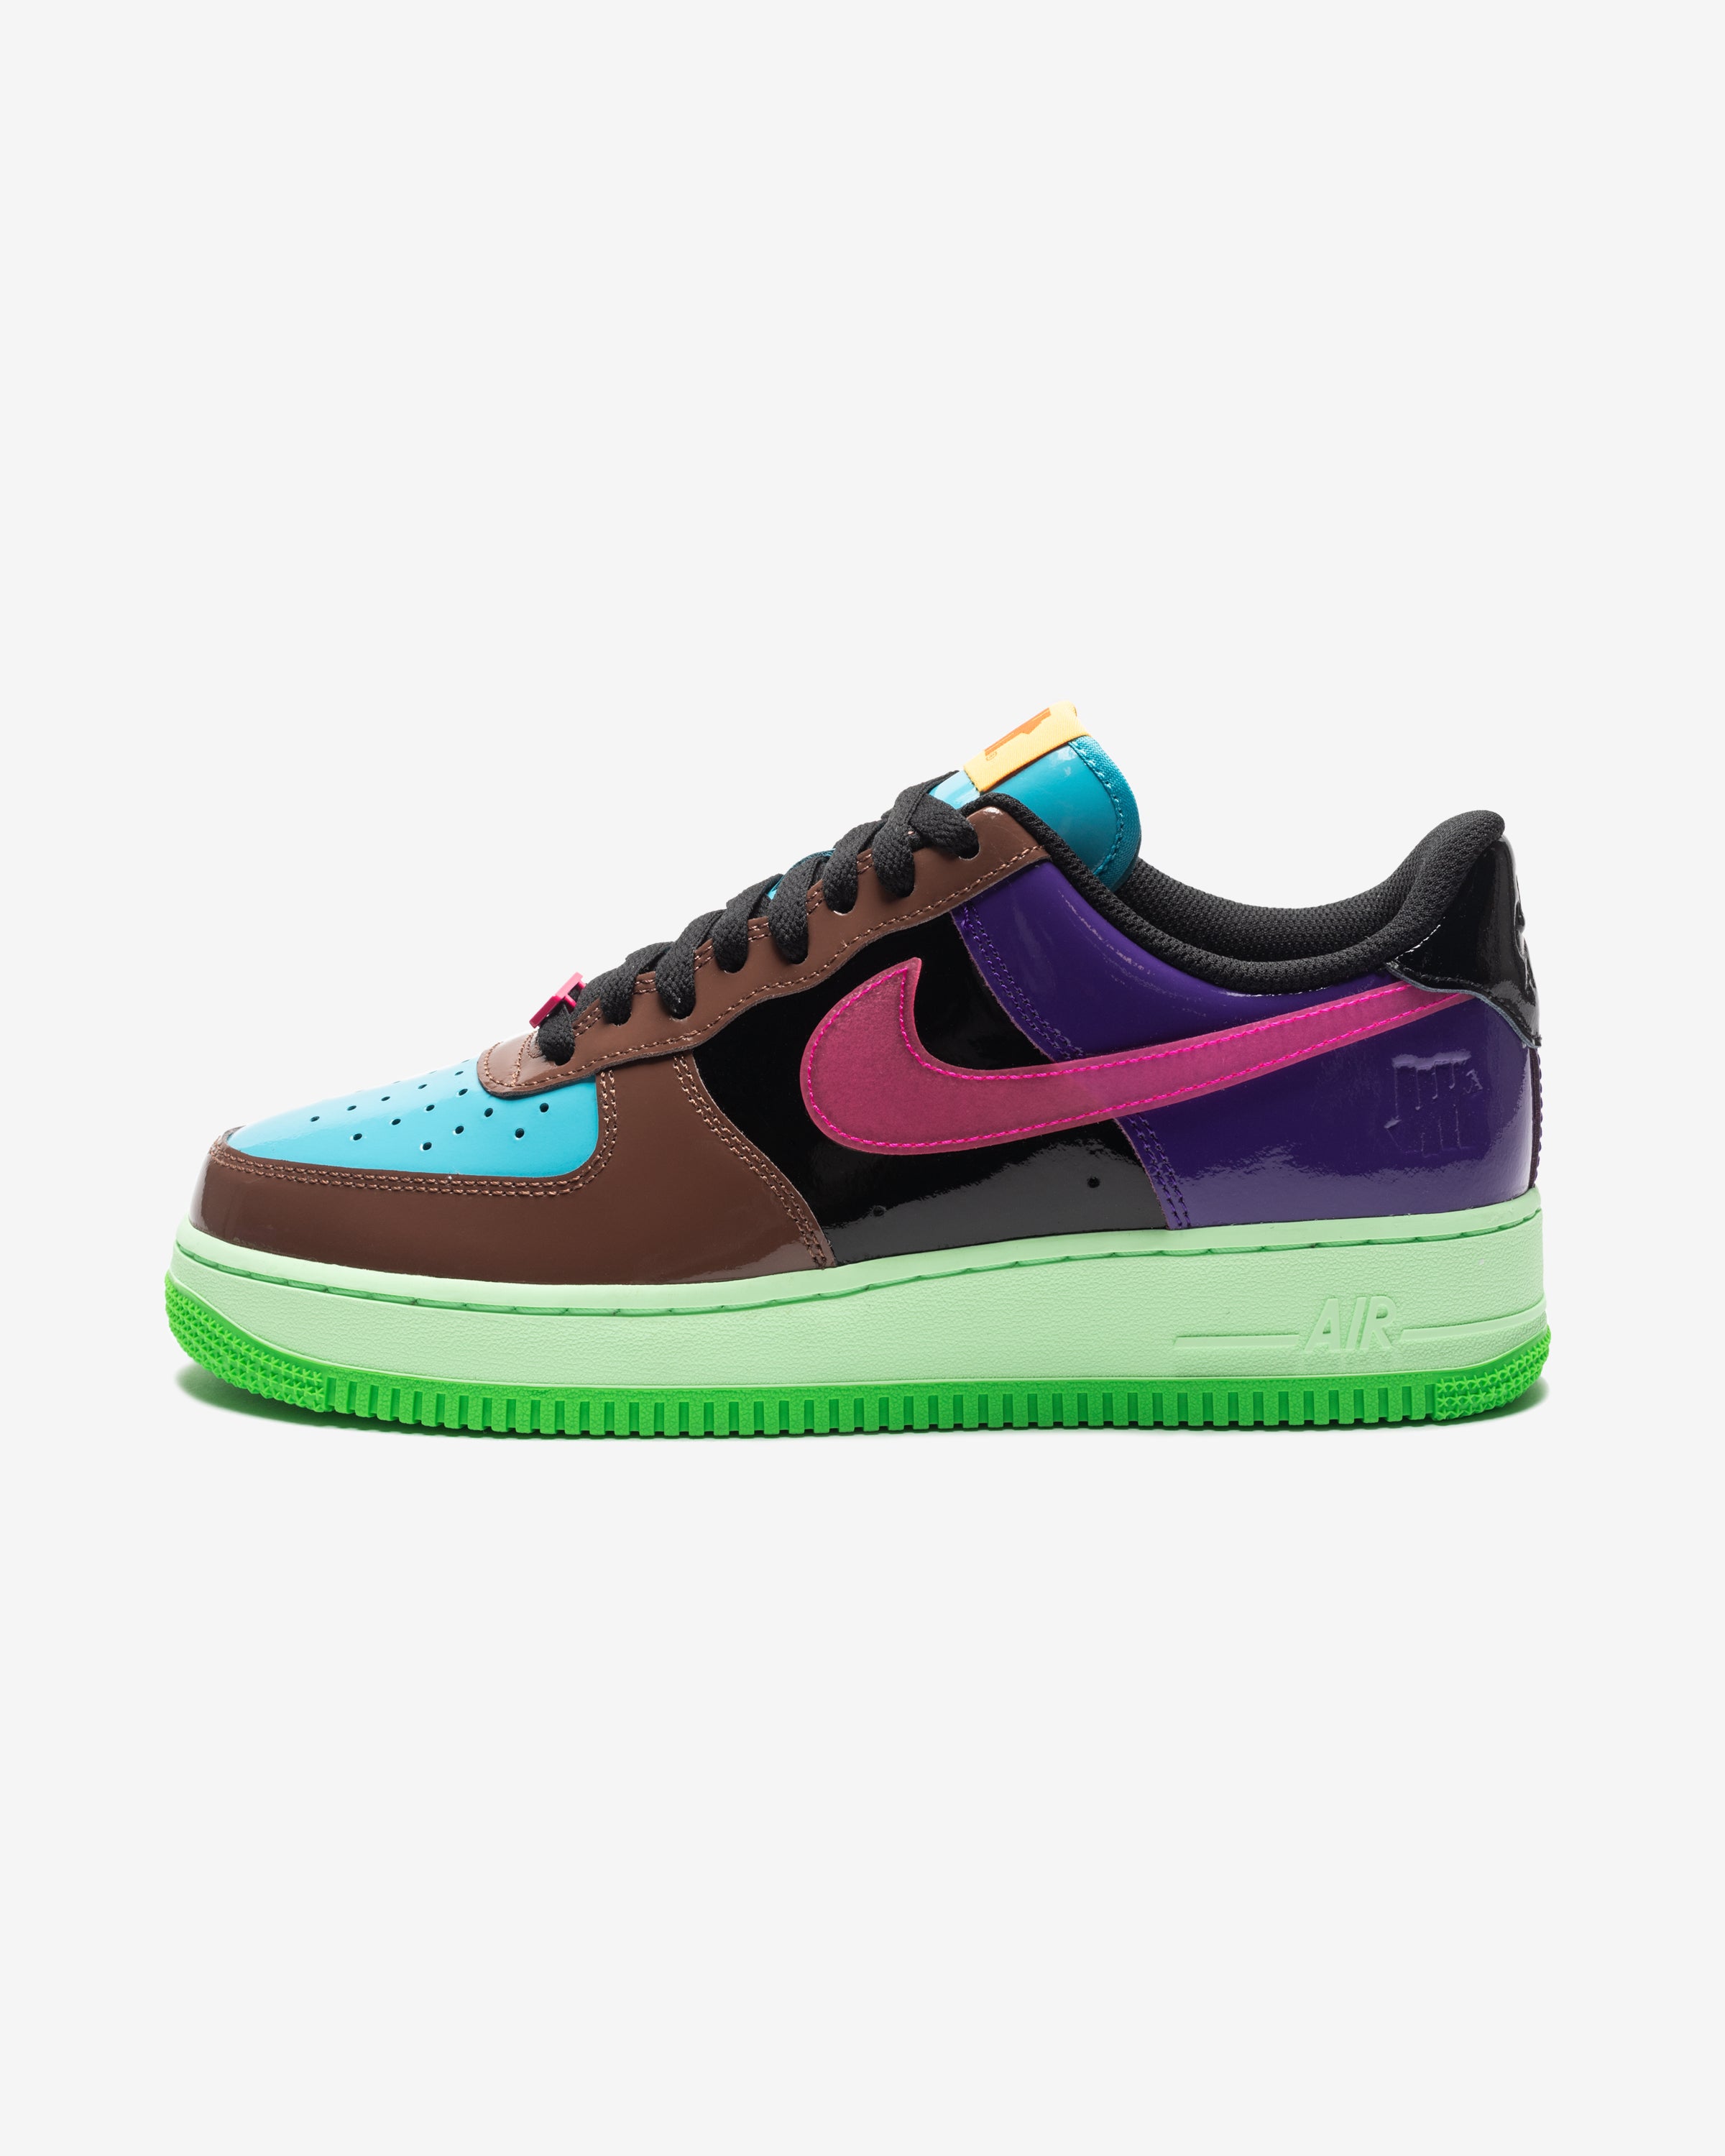 undefeated air force 1 sizing